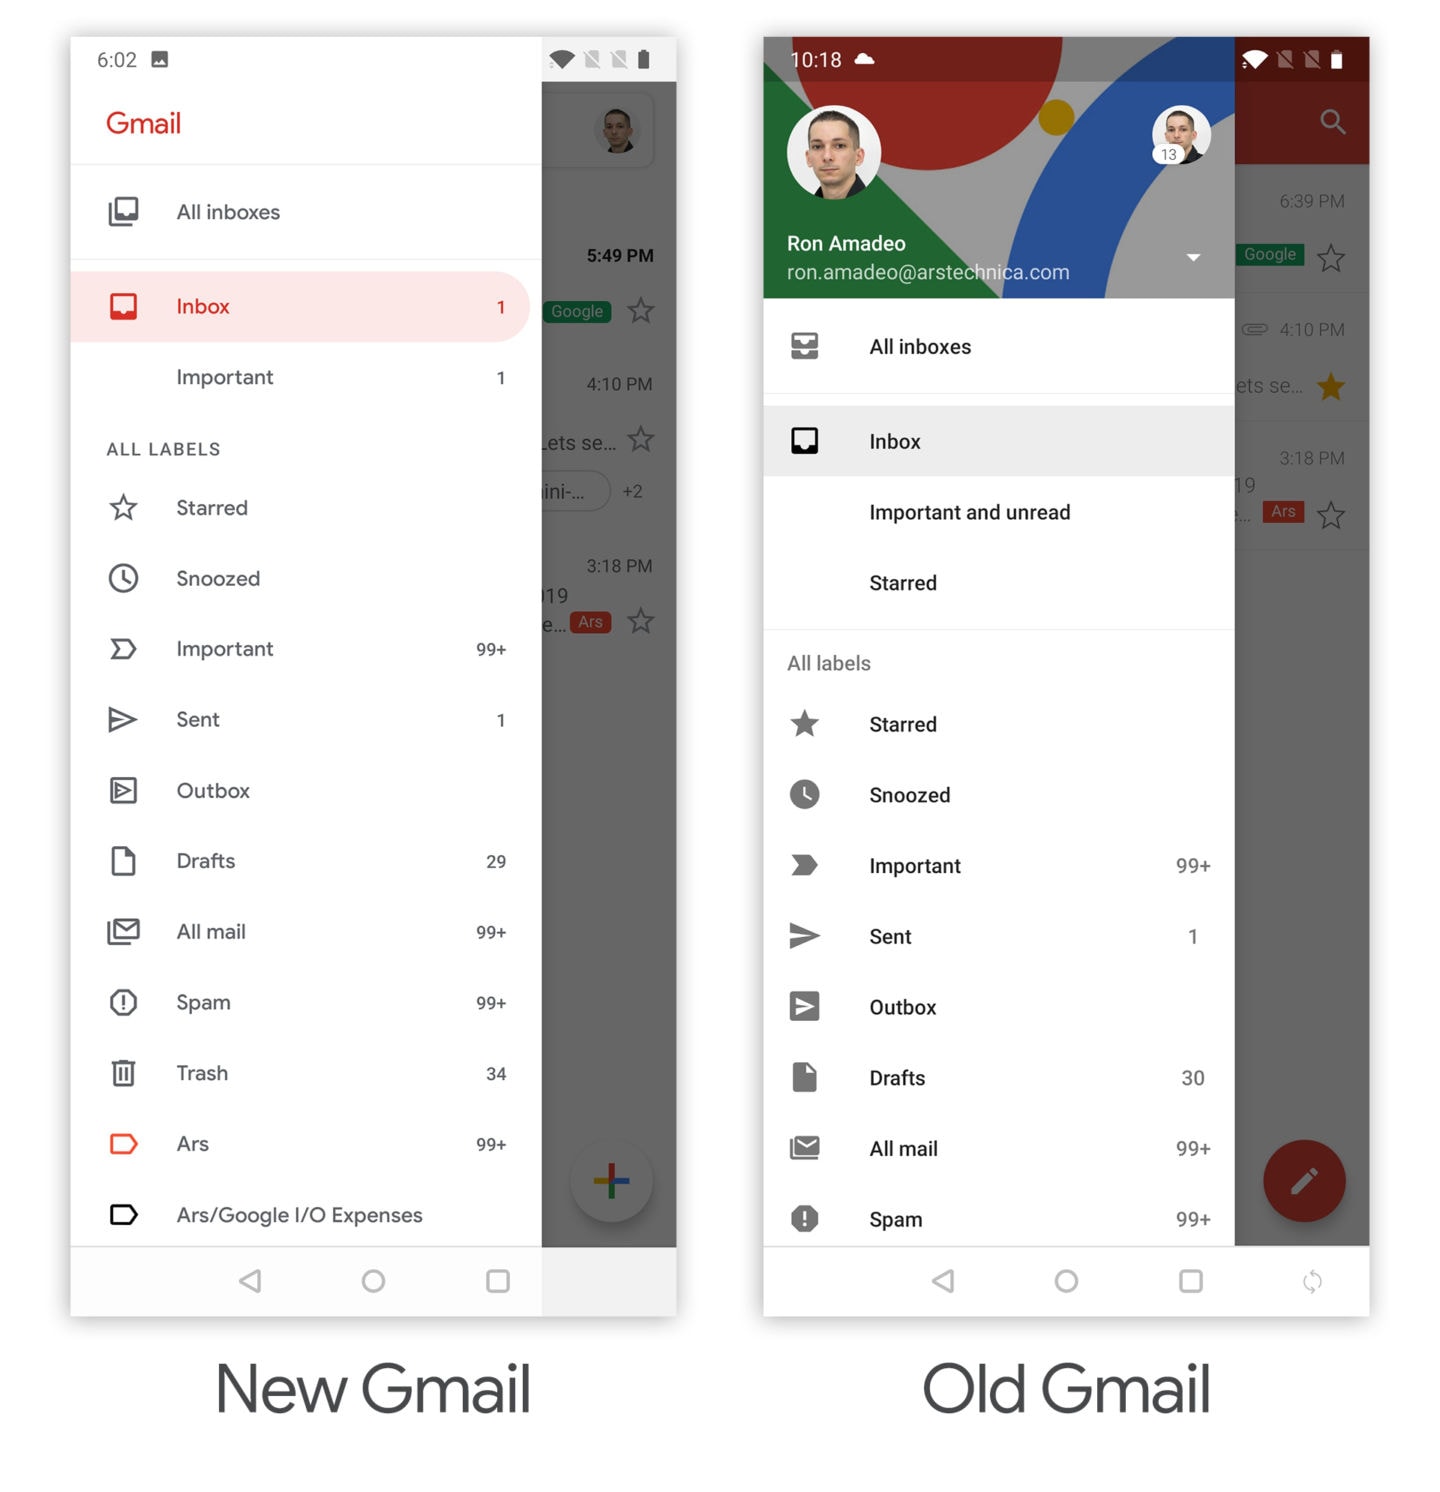 Gmail Big Redesign for Android and iOS